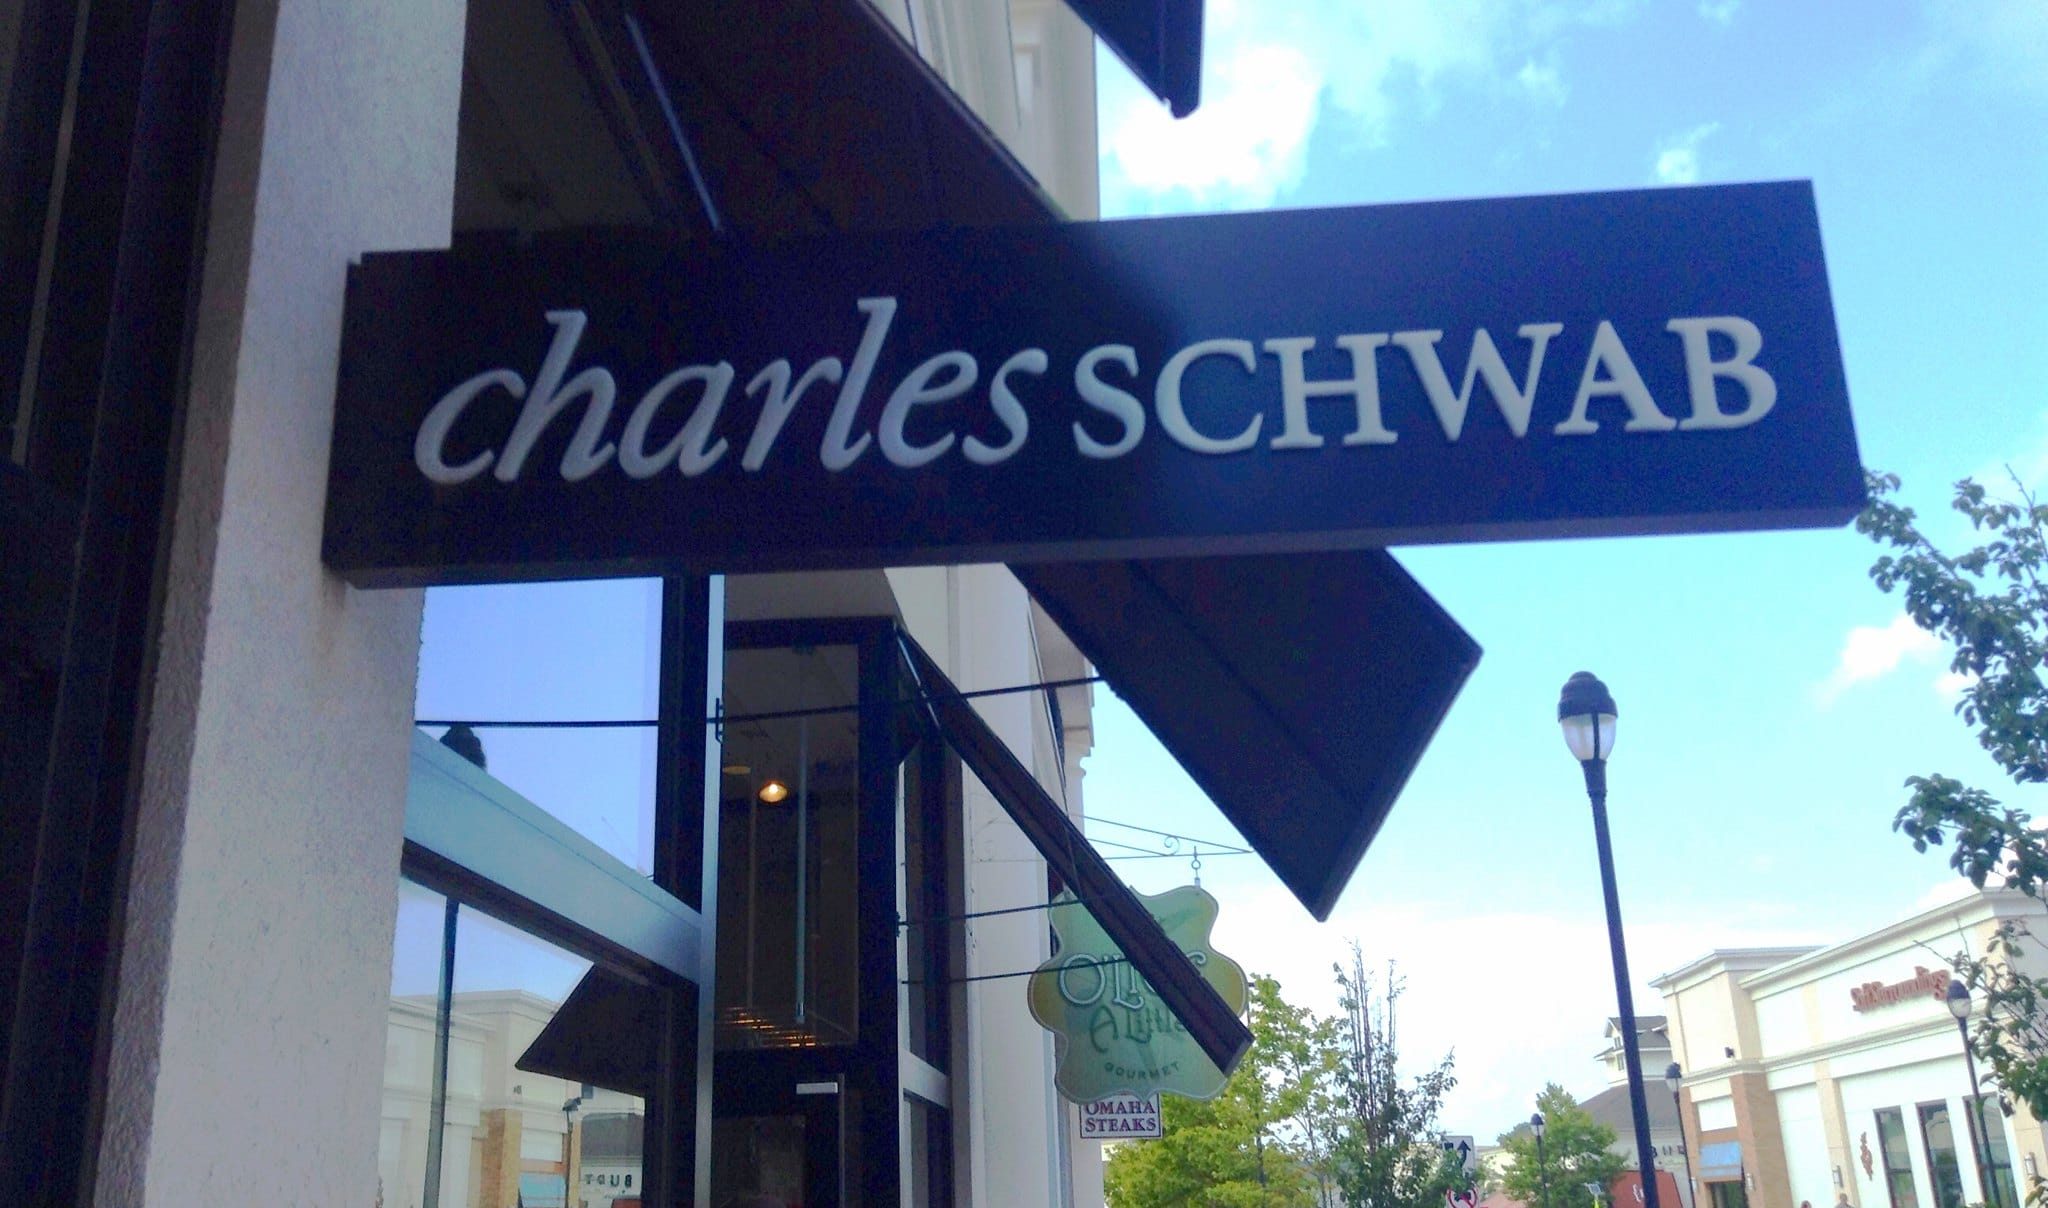 New and Existing Customers Can Earn Up to $6,000 Bonus with Schwab Brokerage Account